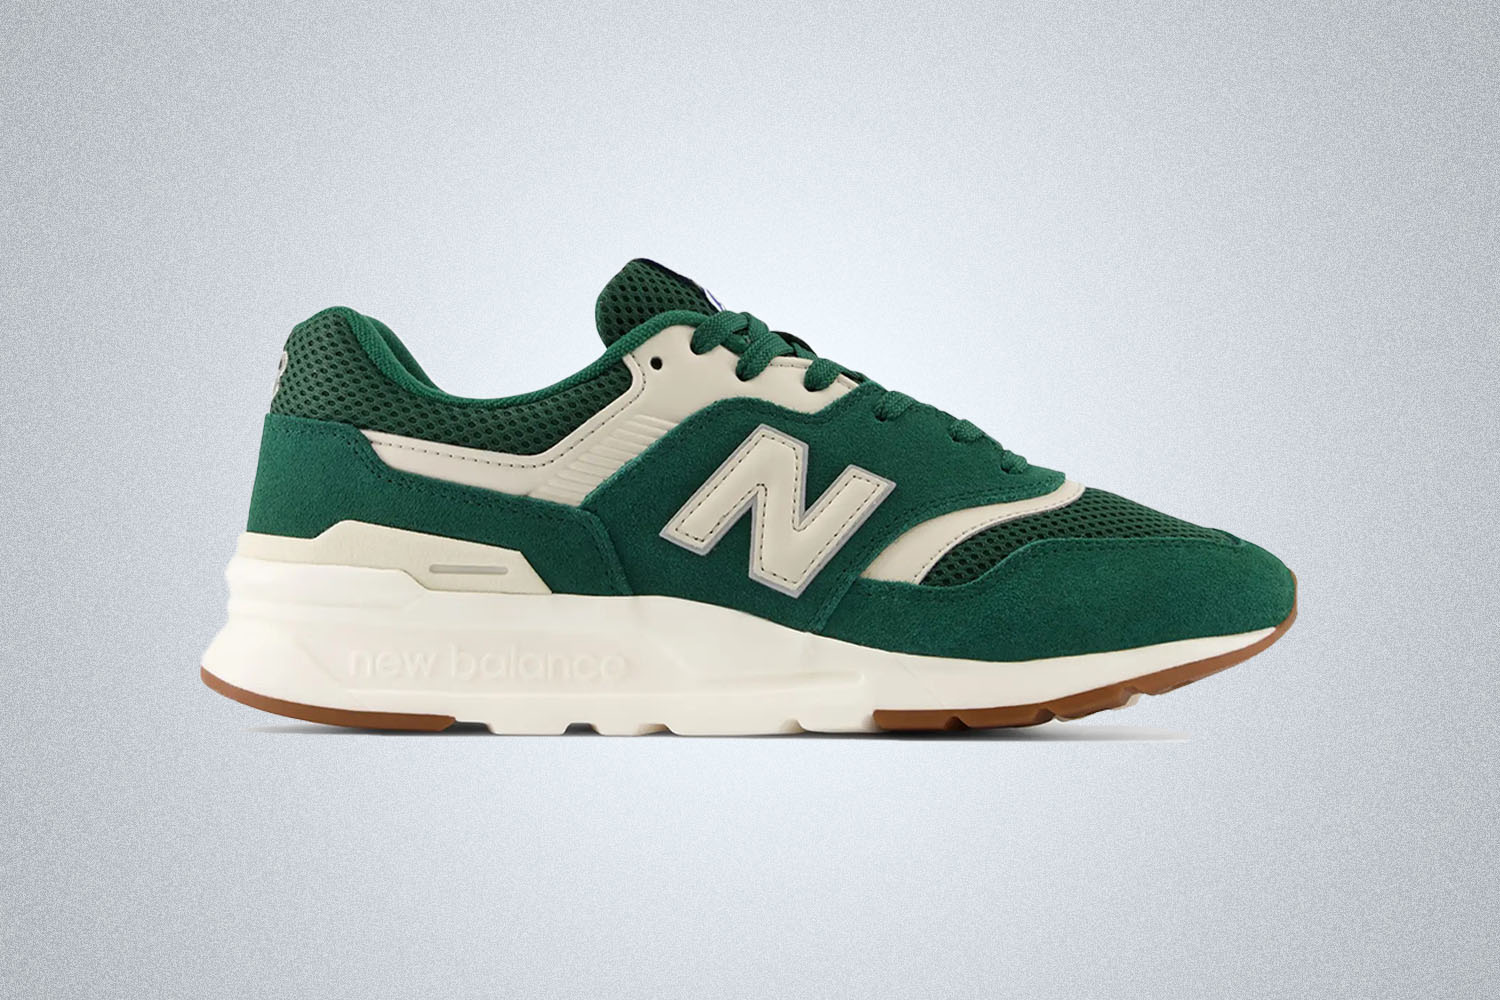 These New Balance Shoes Are Traveler-approved